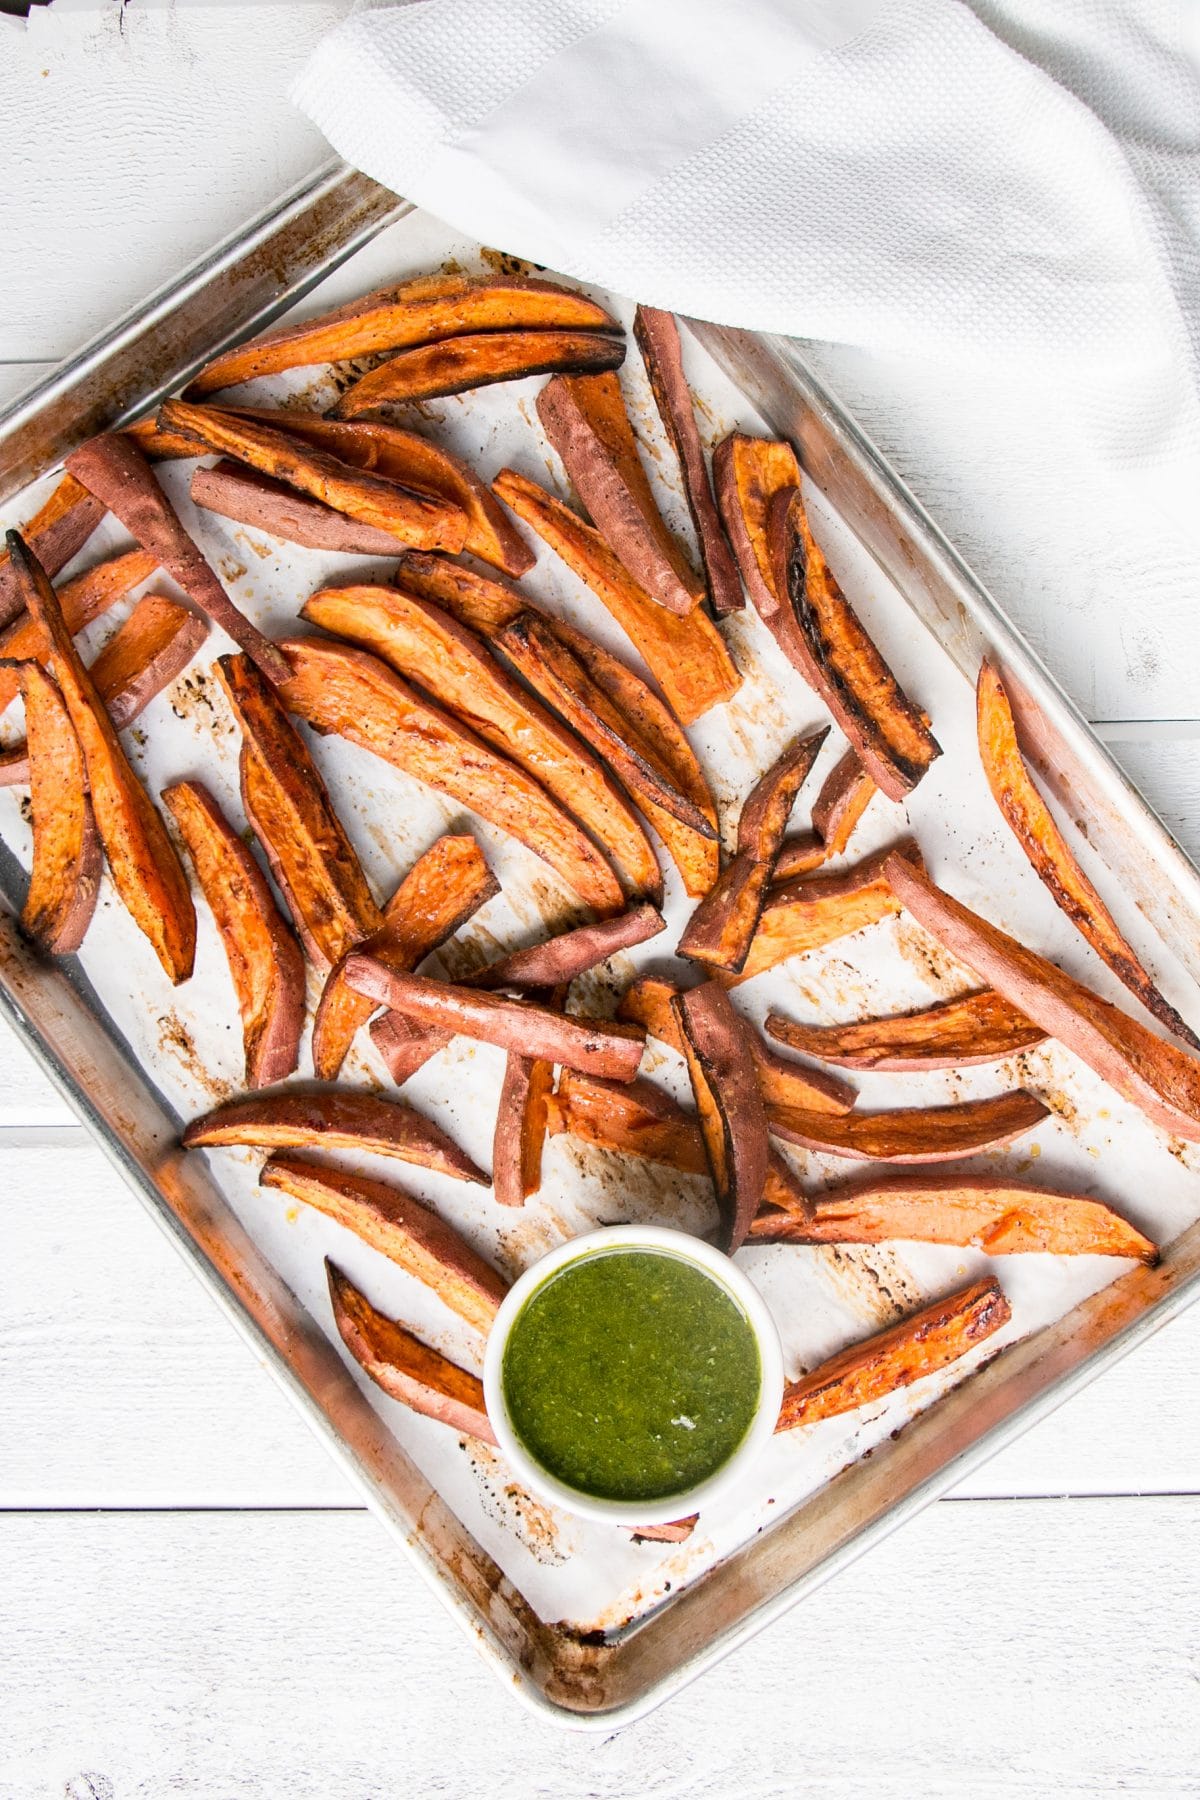 Roasted Sweet Potatoes with Chimichurri is a vibrant and delicious side dish! Super healthy with baked sweet potato fries and herb packed chimichurri sauce. #healthy #sweetpotatoes #fries #chimichurri